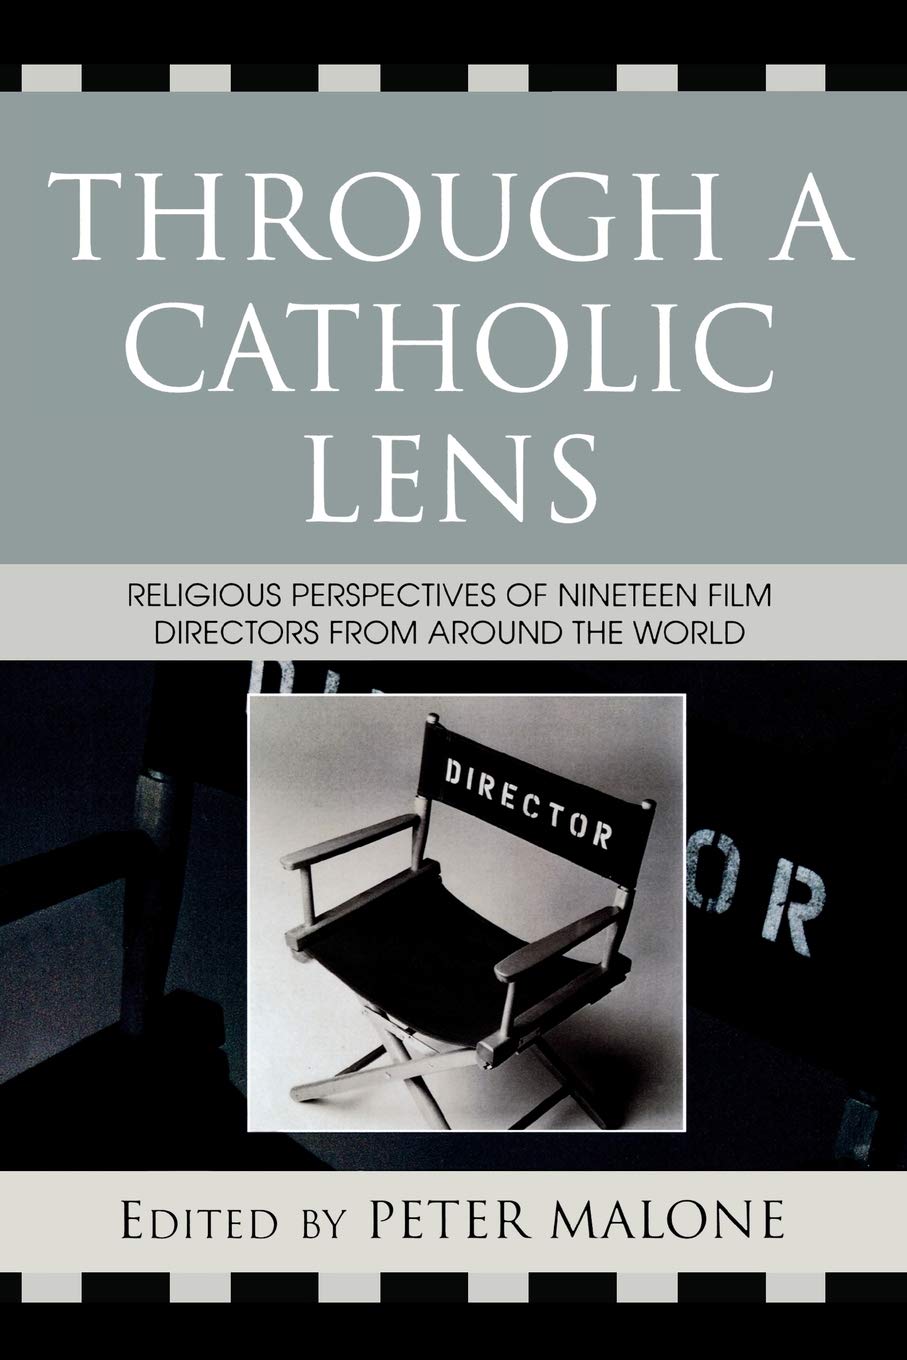 Through a Catholic Lens: Religious Perspectives of 19 Film Directors from Around the World (Communication, Culture, and Religion) - Malone, Peter [Editor]; Pacatte, Rose [Contributor]; Friedman, Greg [Contributor]; Ortiz, Gaye [Contributor]; Roux, Maggie [Contributor]; Gallagher, Michael Paul [Contributor]; Openshaw, Claire [Contributor]; Vigano, Dario [Contributor]; Rix, Rob [Contributor]; Epstein, Jan [Contributor]; Baugh, Lloyd [Contributor]; Malone, Peter [Contributor]; Cruz, Nick [Contributor]; de Barros, Jose Tavares [Contributor]; Yanez, Ricardo [Contributor]; Orso, Luis Garcia [Contributor]; Convents, Guido [Contributor]; Gervais, Marc [Contributor]; Aitken, Tom [Contributor]; Abbott, James [Contributor];